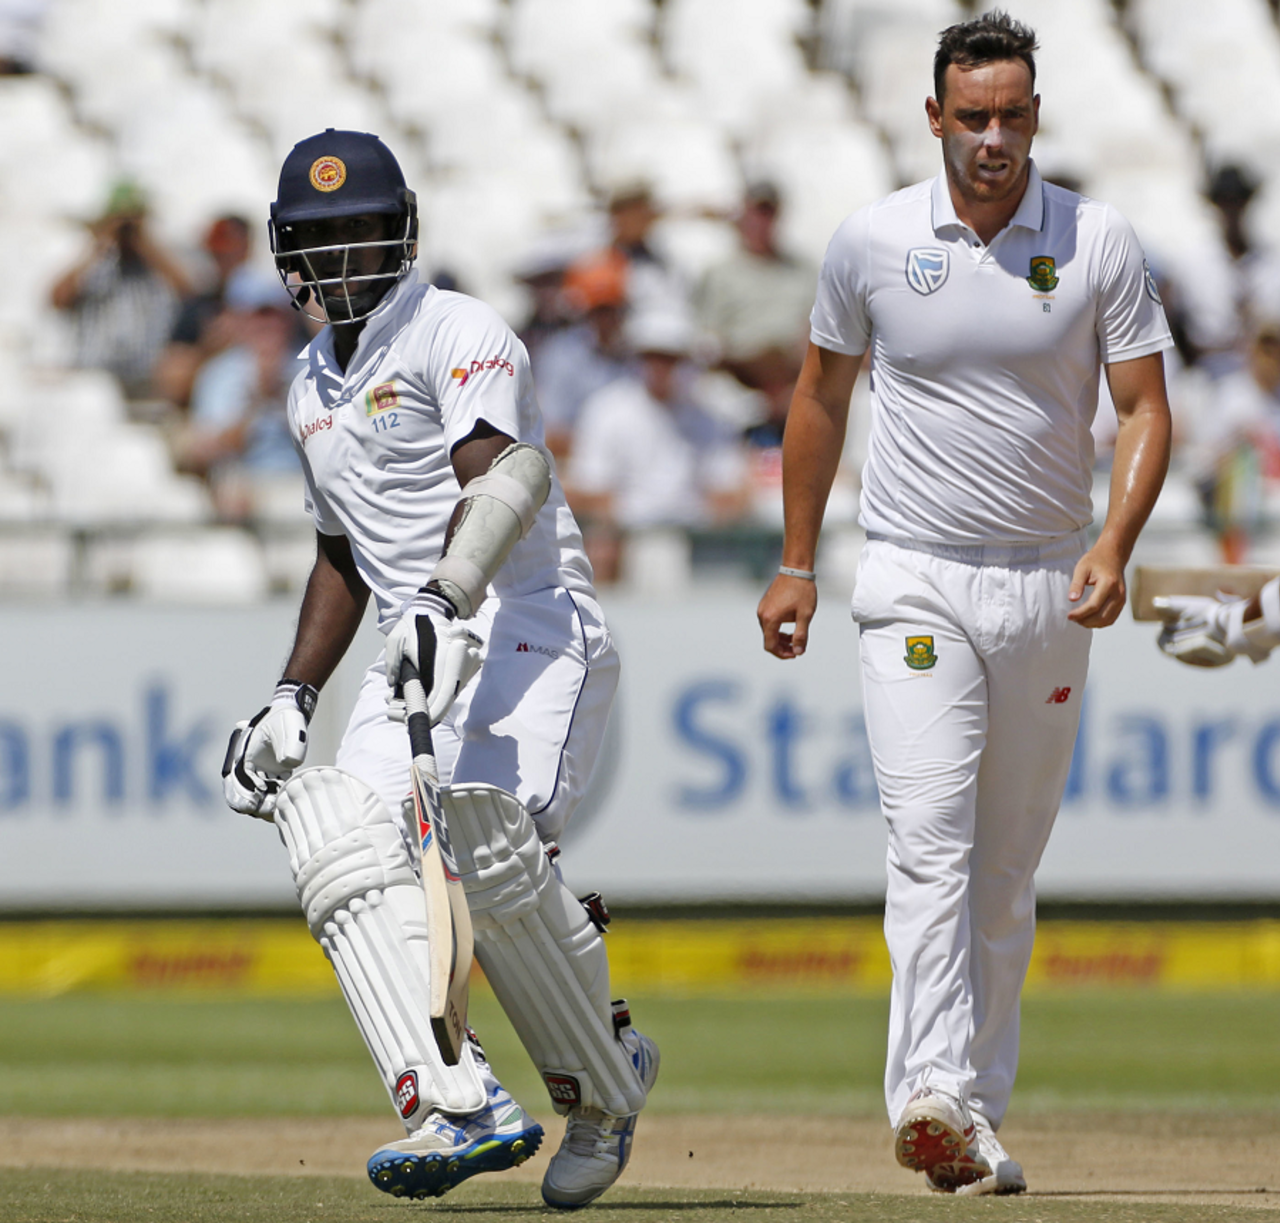 Kyle Abbott walks back as Angelo Mathews completes a run, South Africa v Sri Lanka, 2nd Test, Cape Town, 4th day, January 5, 2017